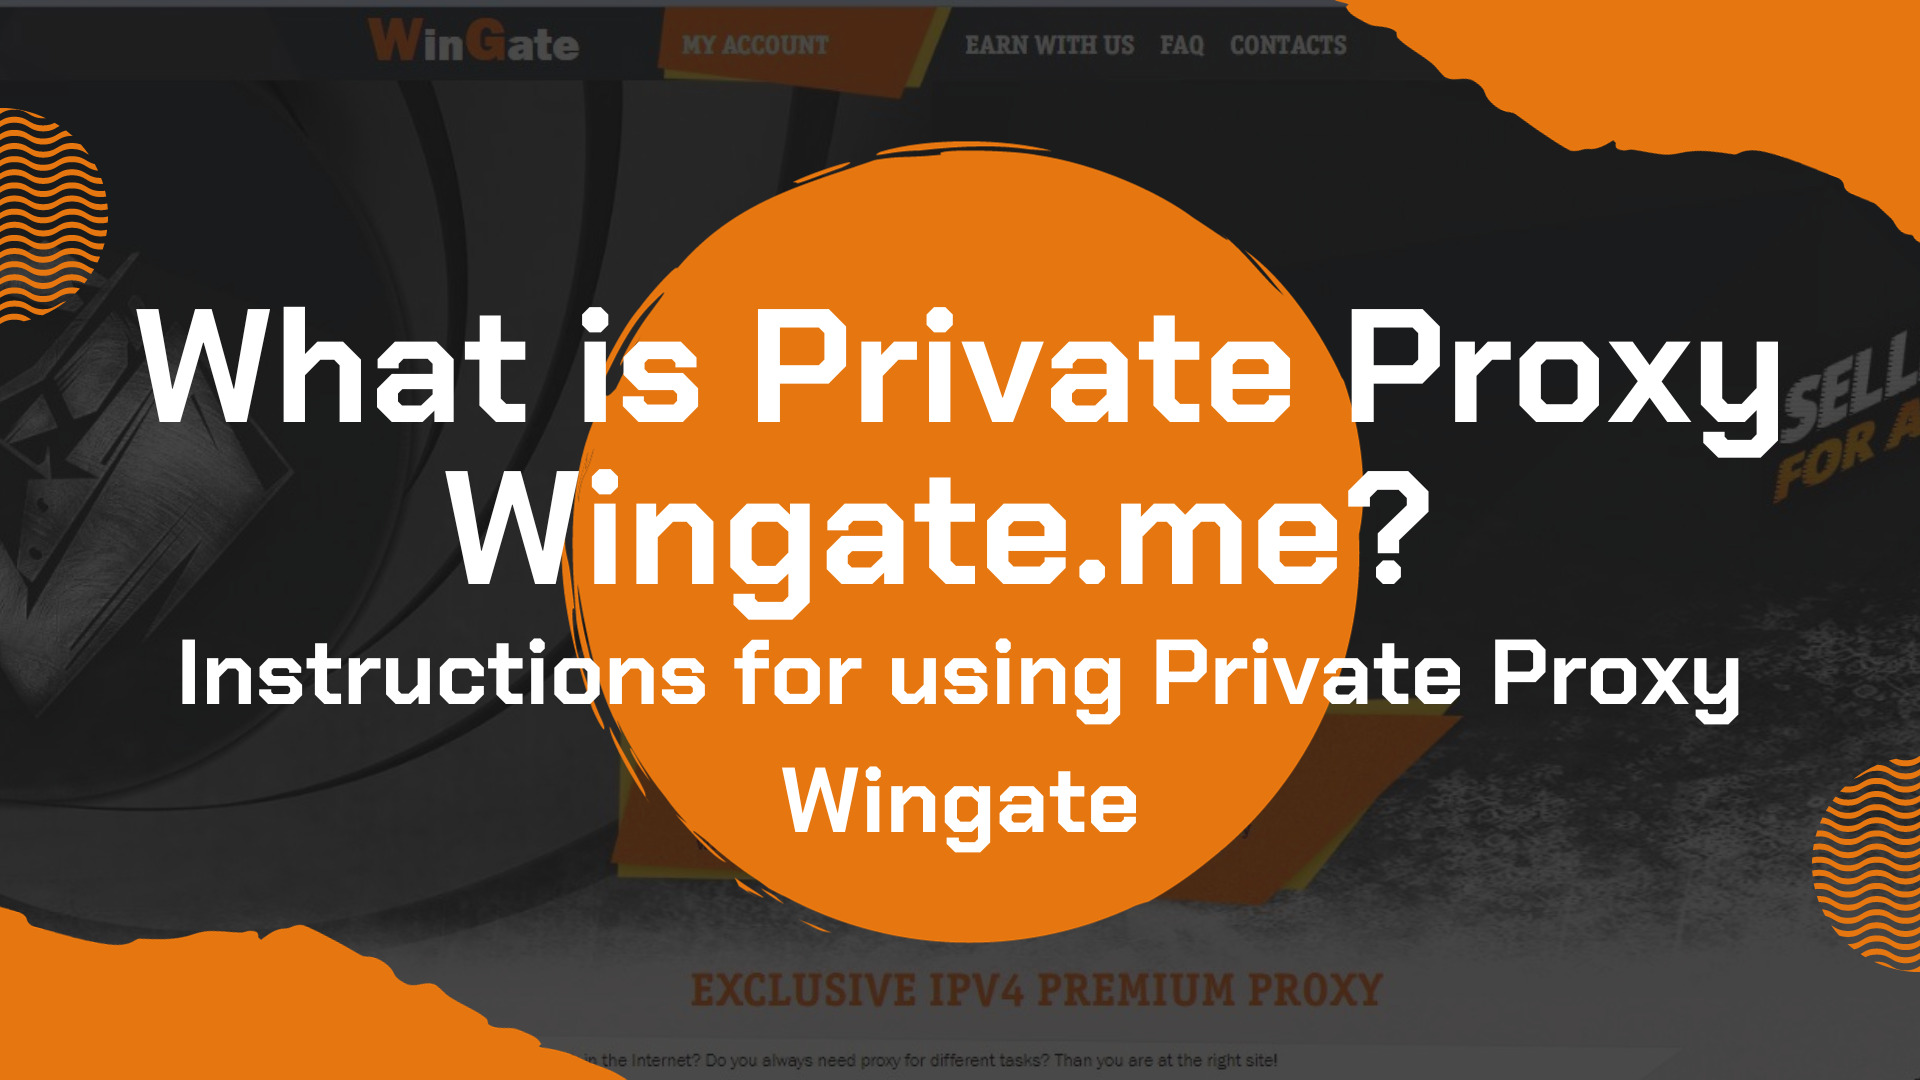 What is Private Proxy Wingate.me? Instructions for using Private Proxy Wingate